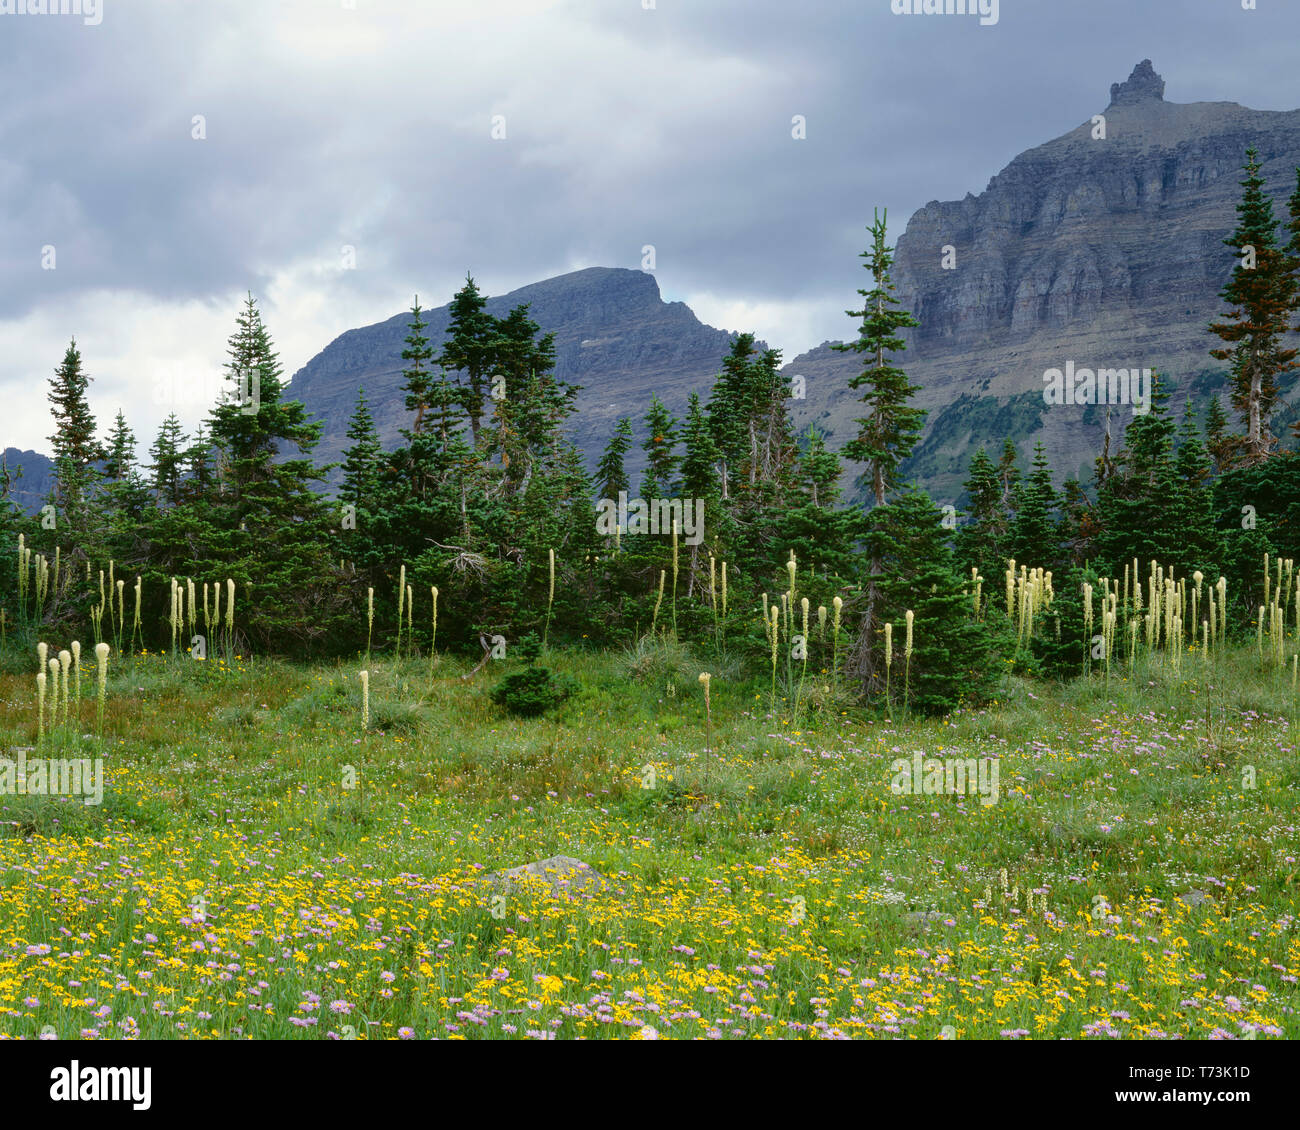 USA, Montana, Glacier National Park, Arnica, fleabane, beargrass and subalpine fir in meadow beneath Logan Pass with storm clouds over peaks. Stock Photo